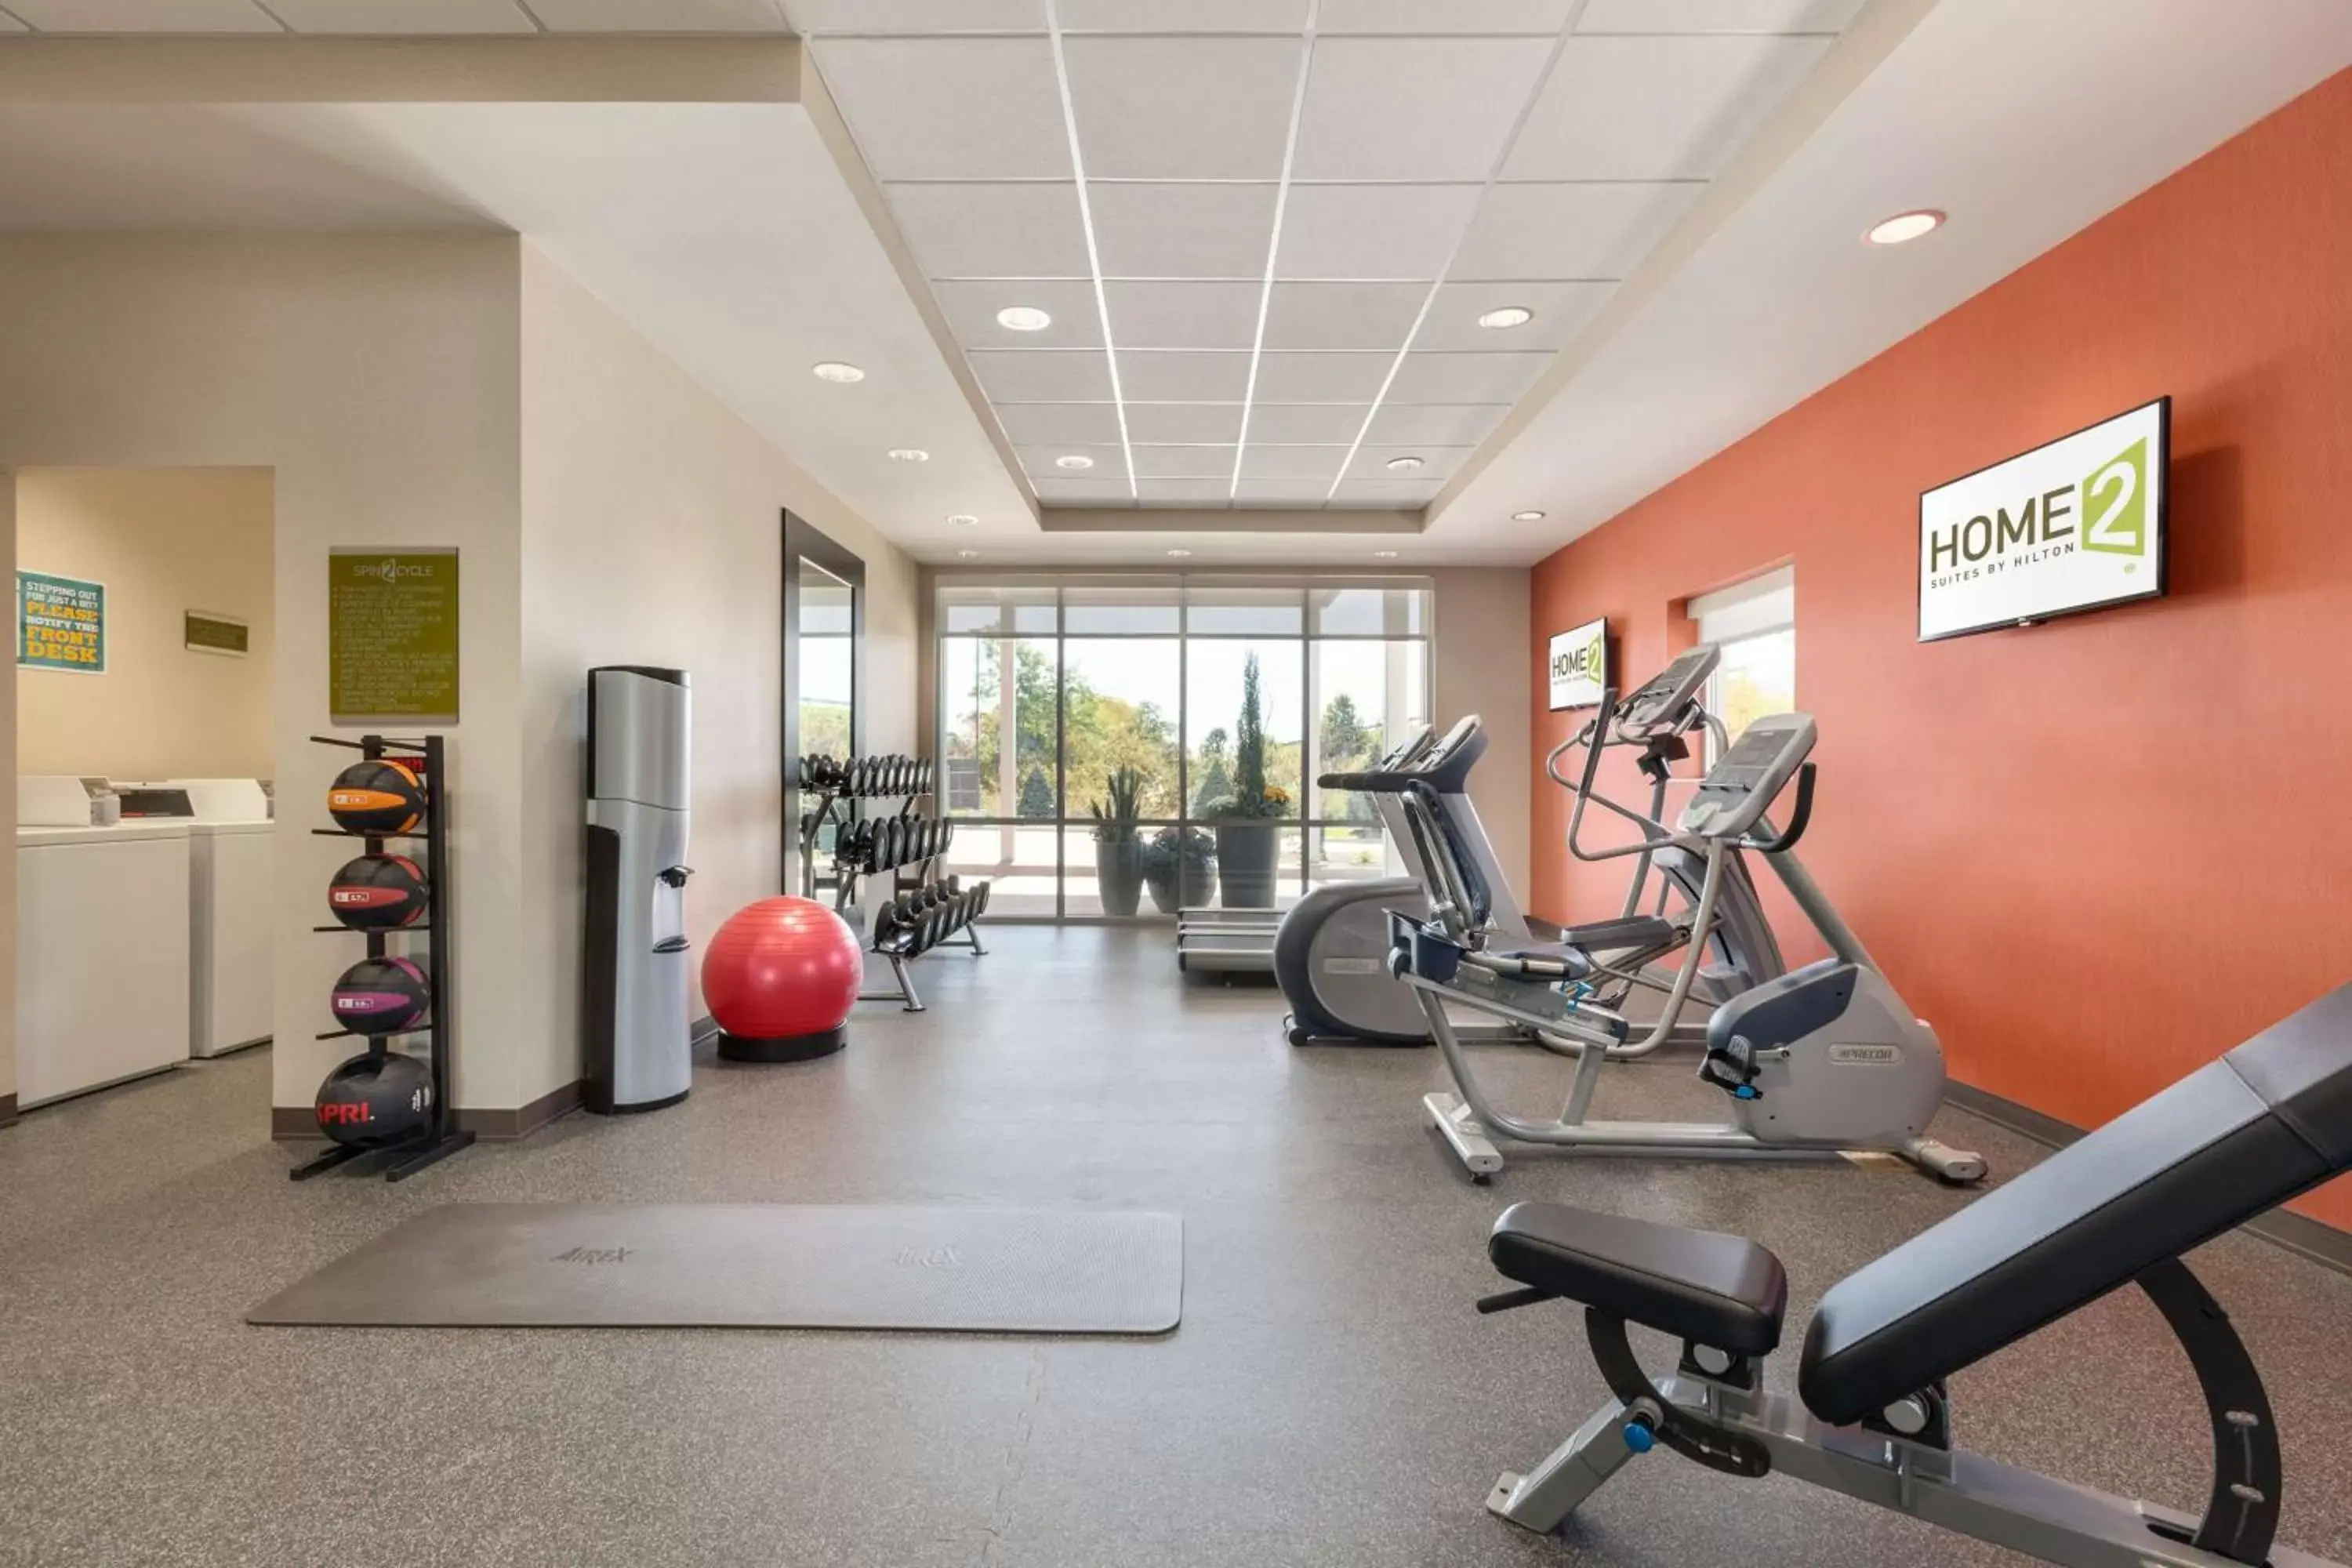 Fitness centre/facilities, Fitness Center/Facilities in Home2 Suites By Hilton Youngstown